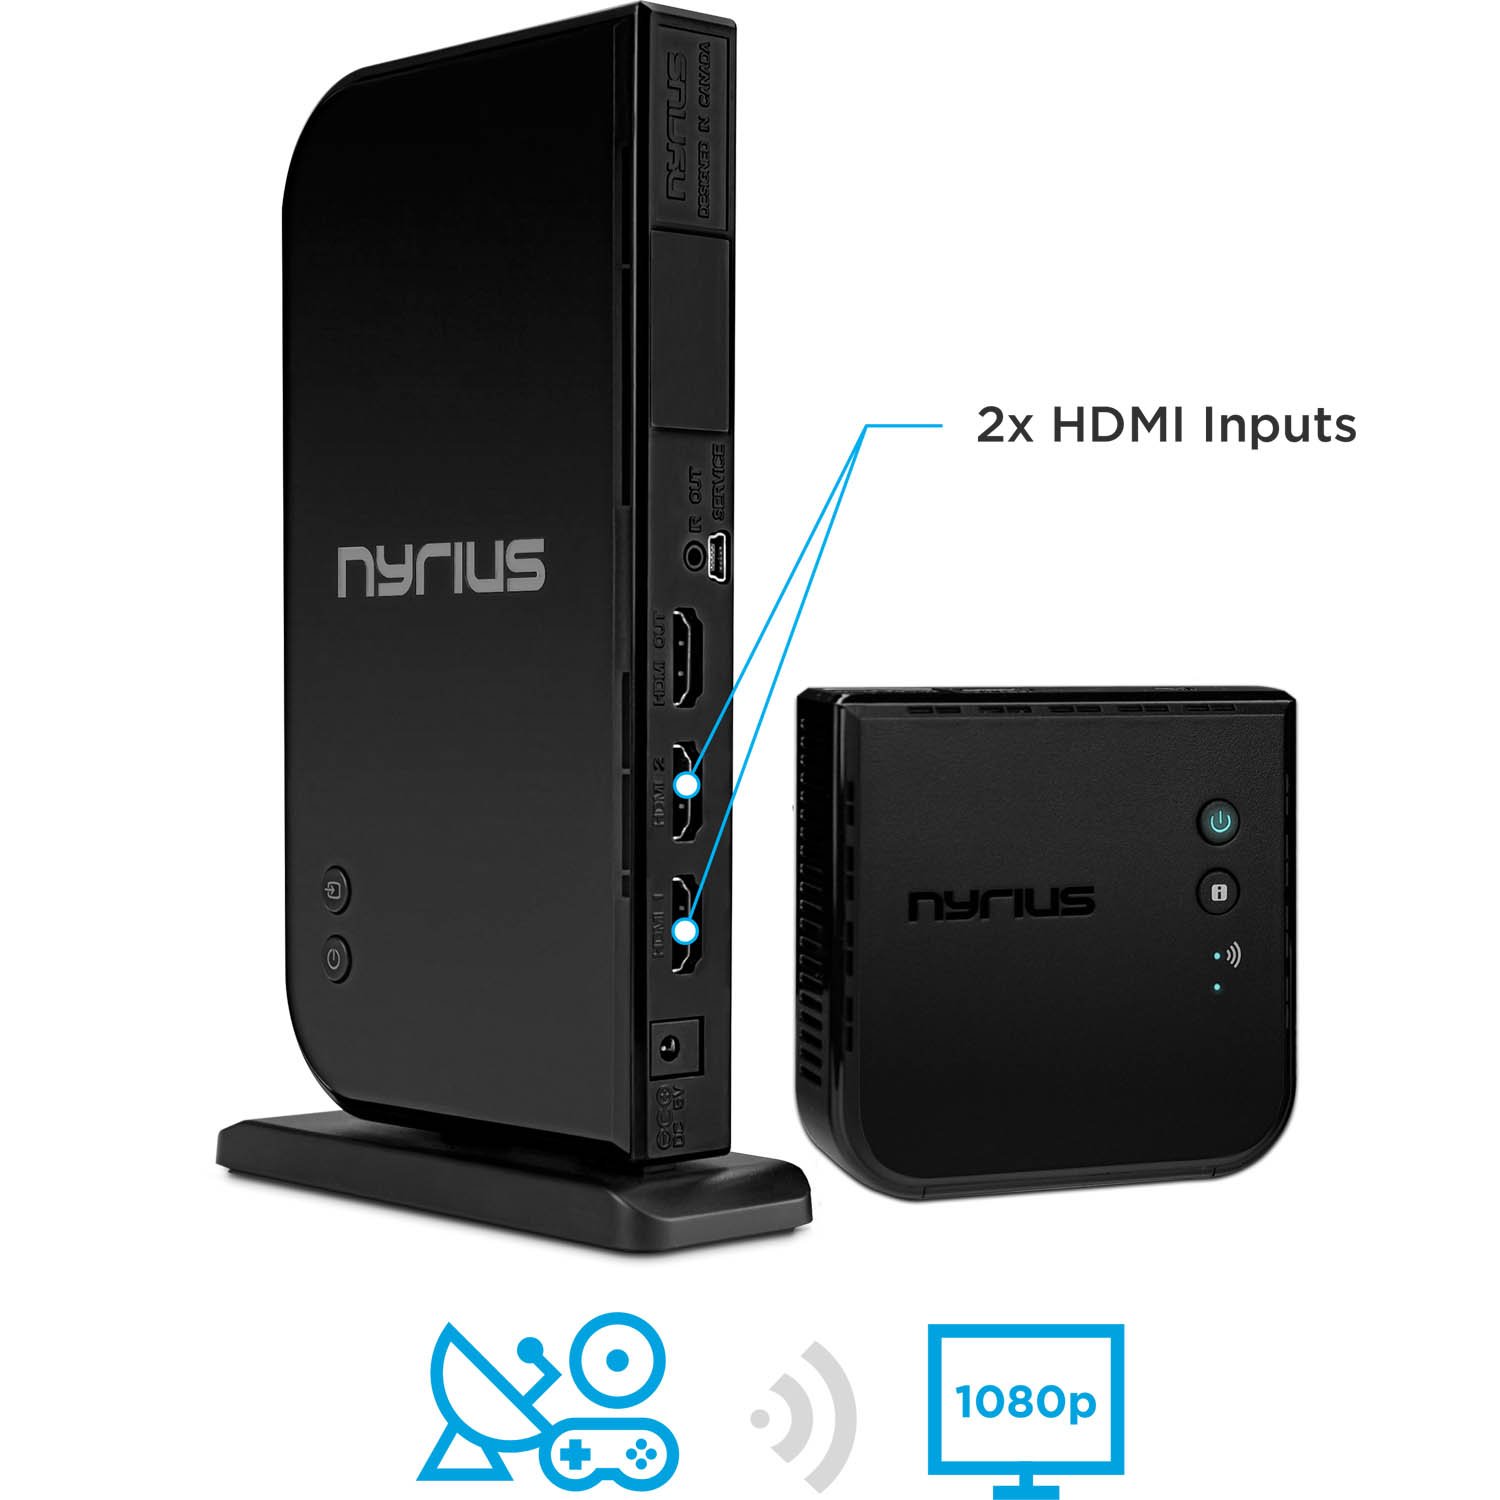 Nyrius Aries Home+ Wireless HDMI 2X Input Transmitter & Receiver for Streaming HD 1080p 3D Video and Digital Audio (NAVS502) - Bonus Additional Nyrius HDMI Cable Included